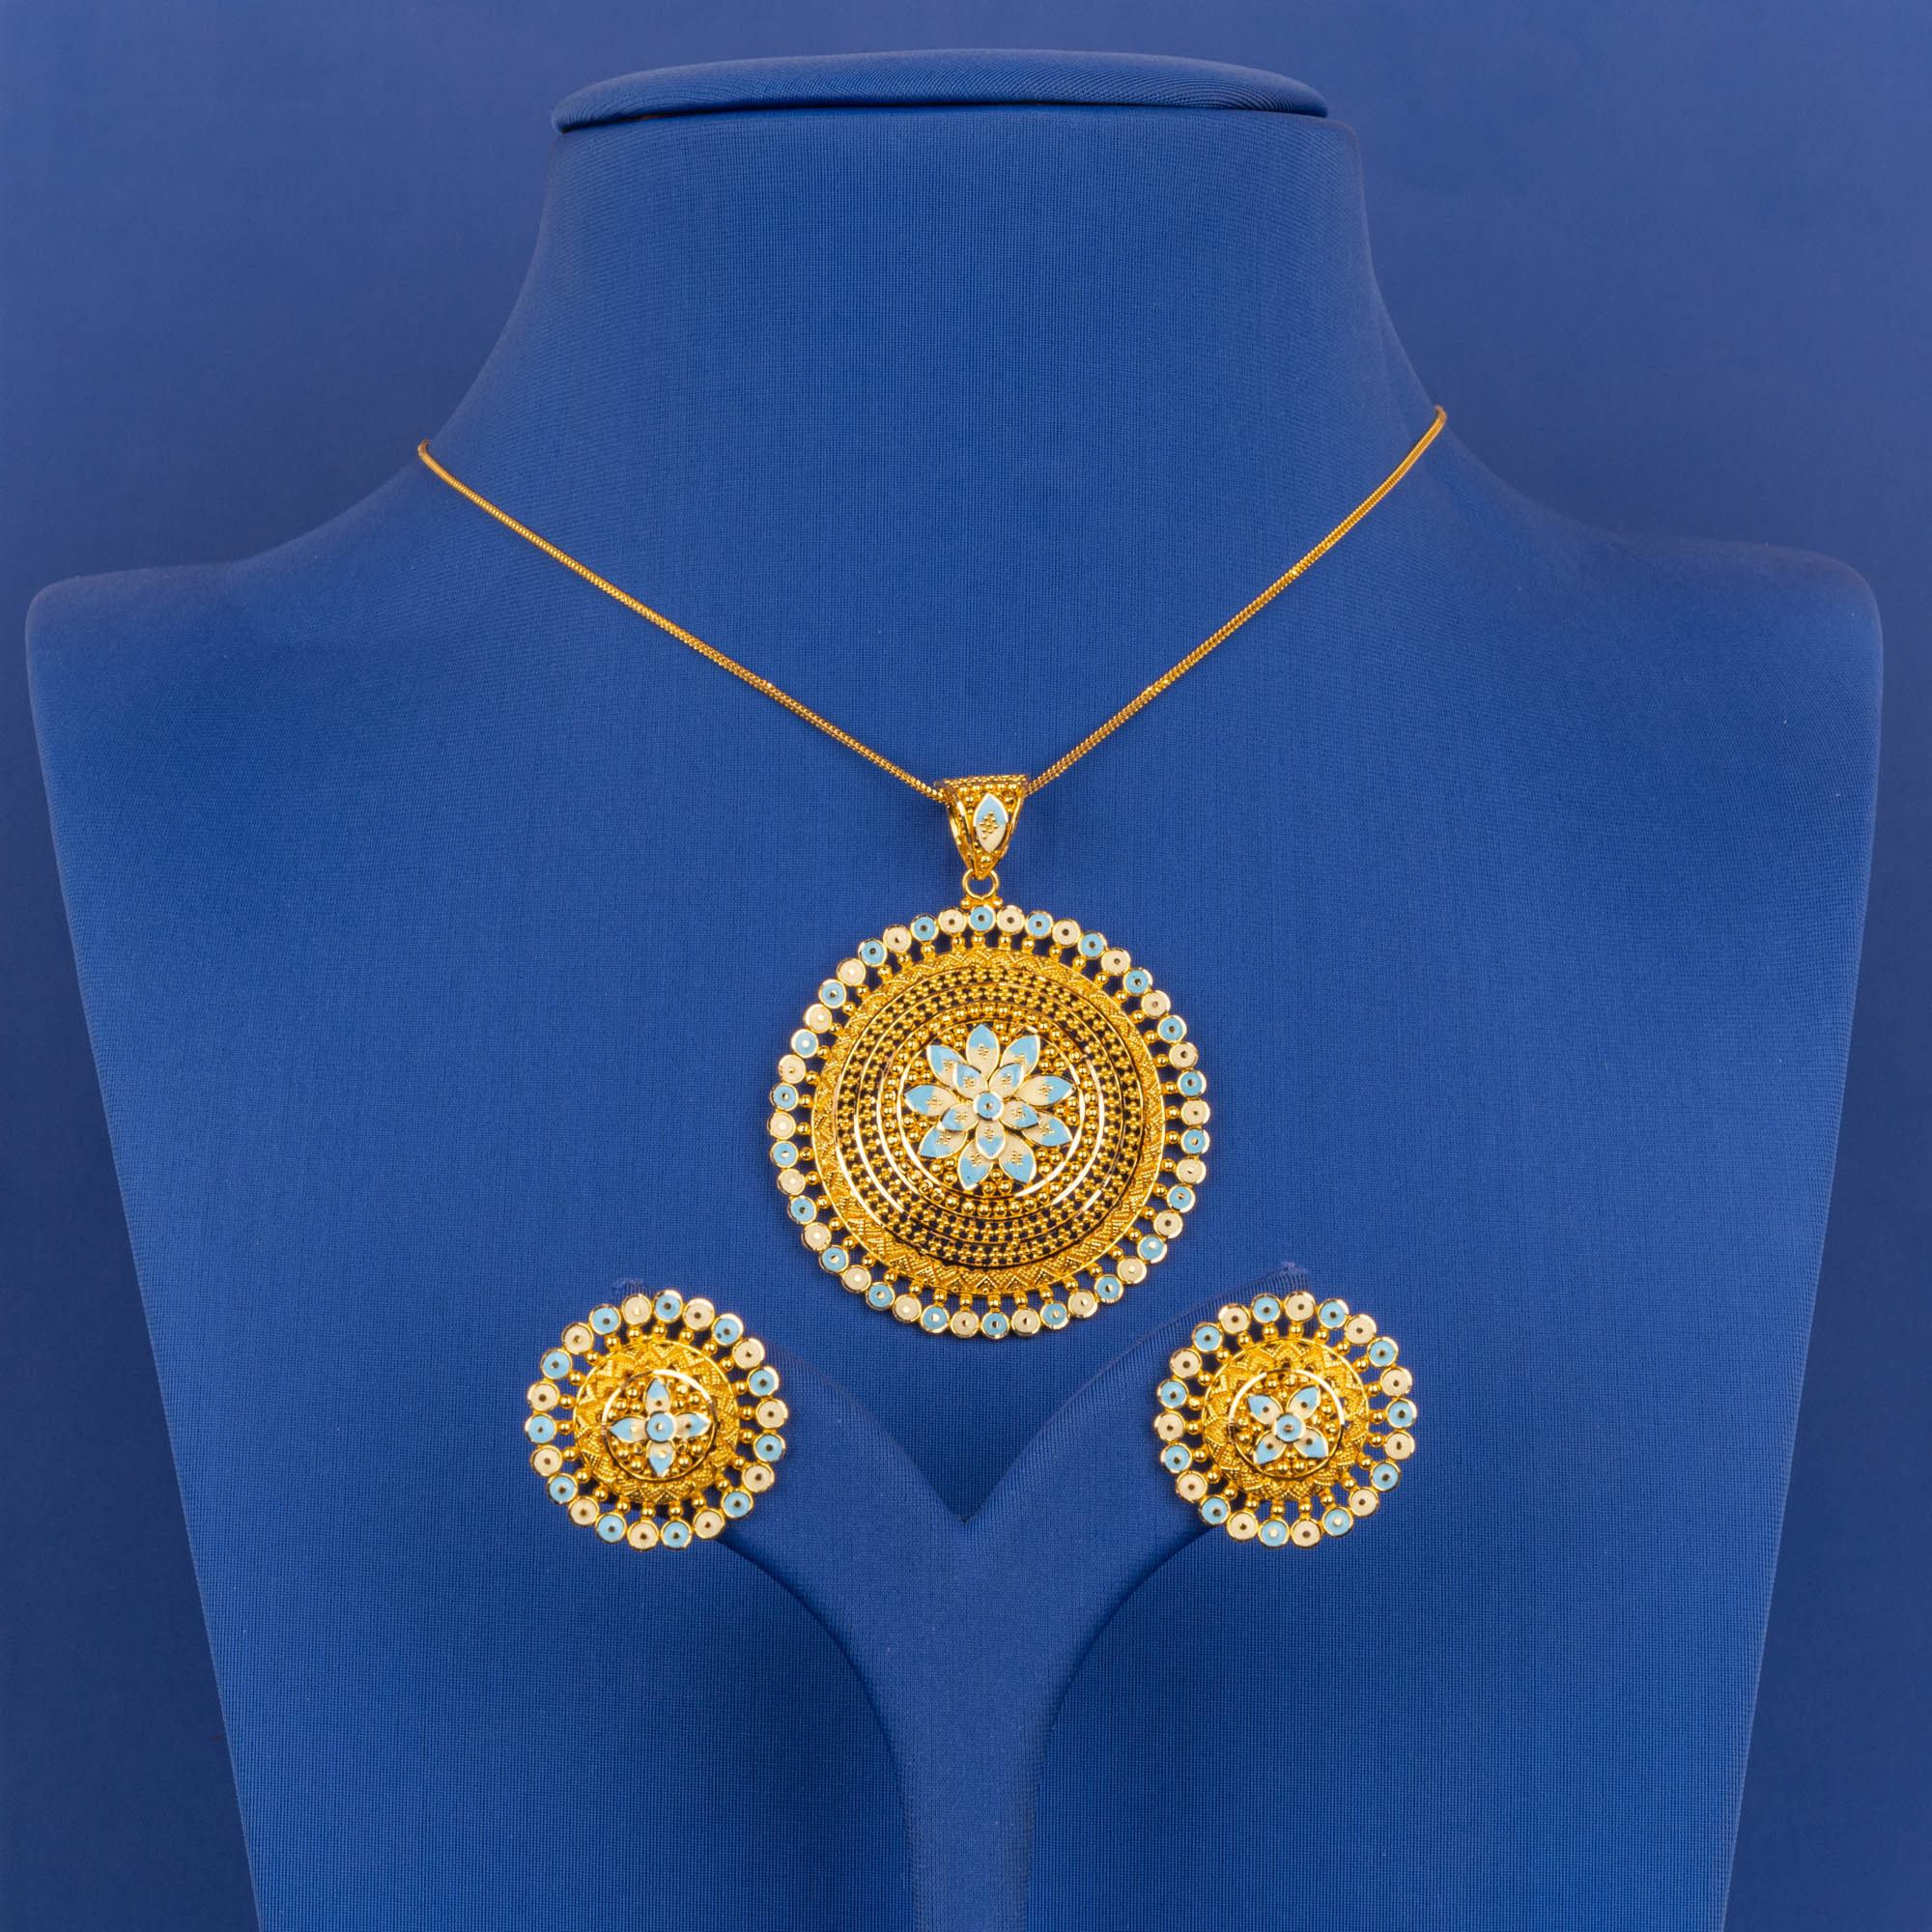 Floral Serenity: Enchanting 22K Gold Minakari Pendant and Earrings Set (chain not included)